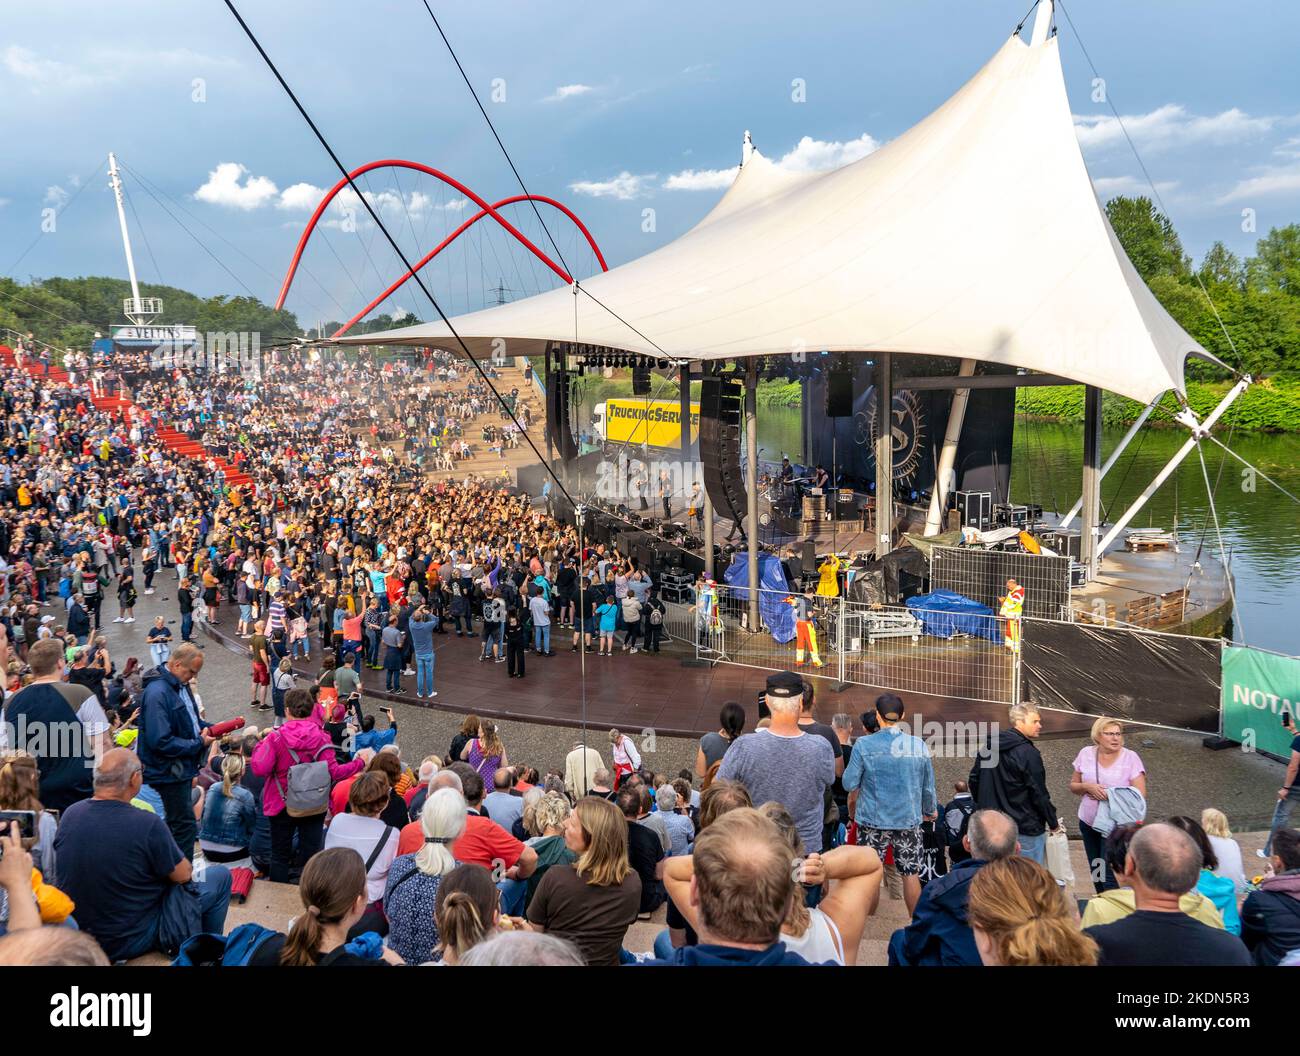 Concert at the Amphitheatre, Nordsternpark, on the Rhine-Herne Canal in Gelsenkirchen, NRW, Germany, Stock Photo